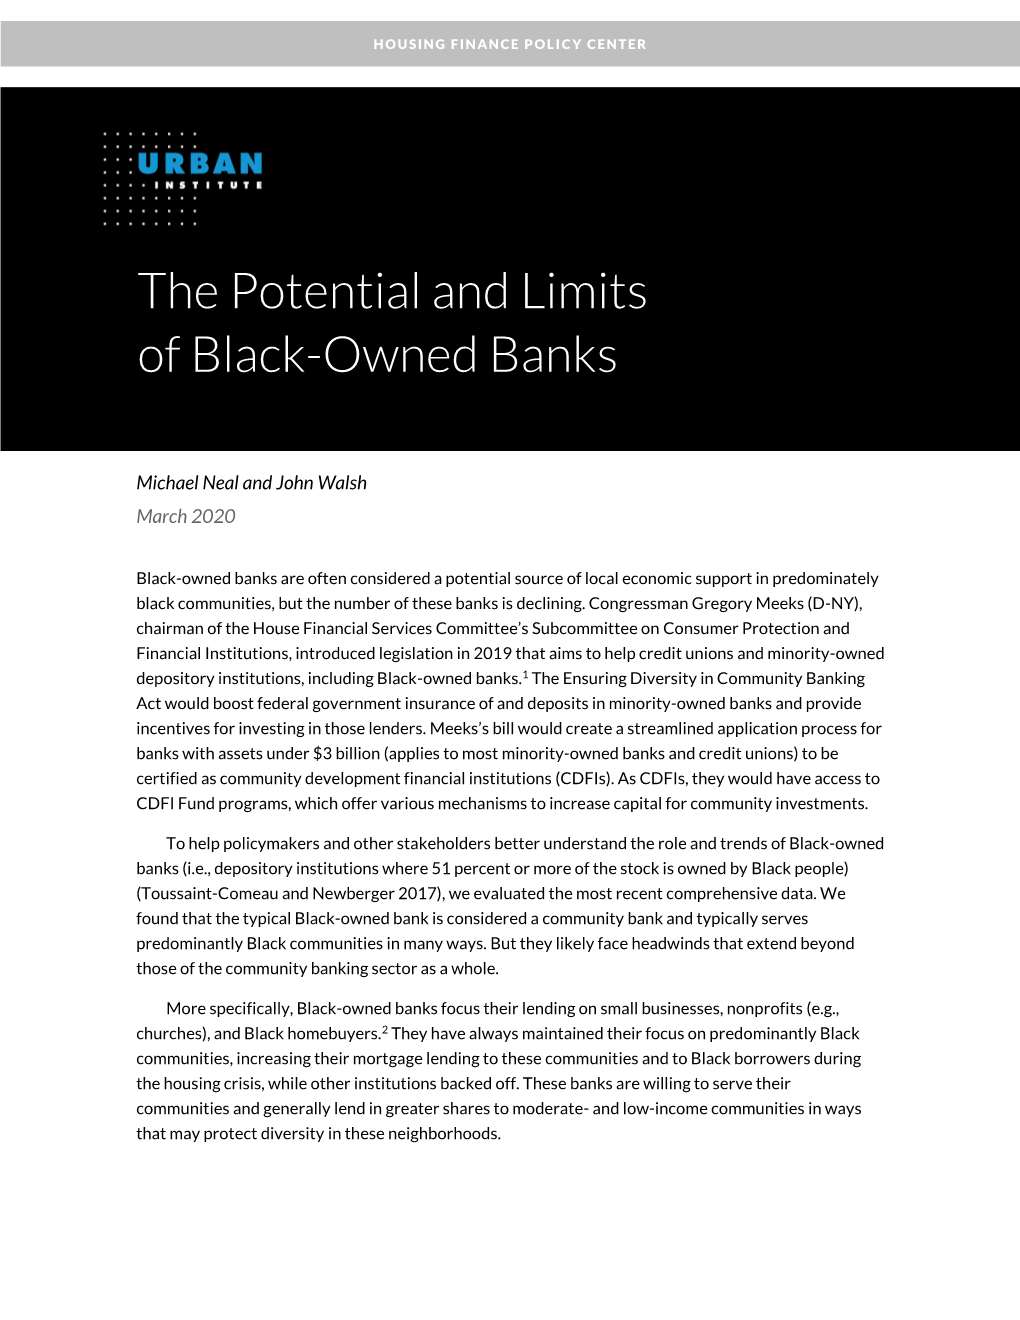 The Potential and Limits of Black-Owned Banks